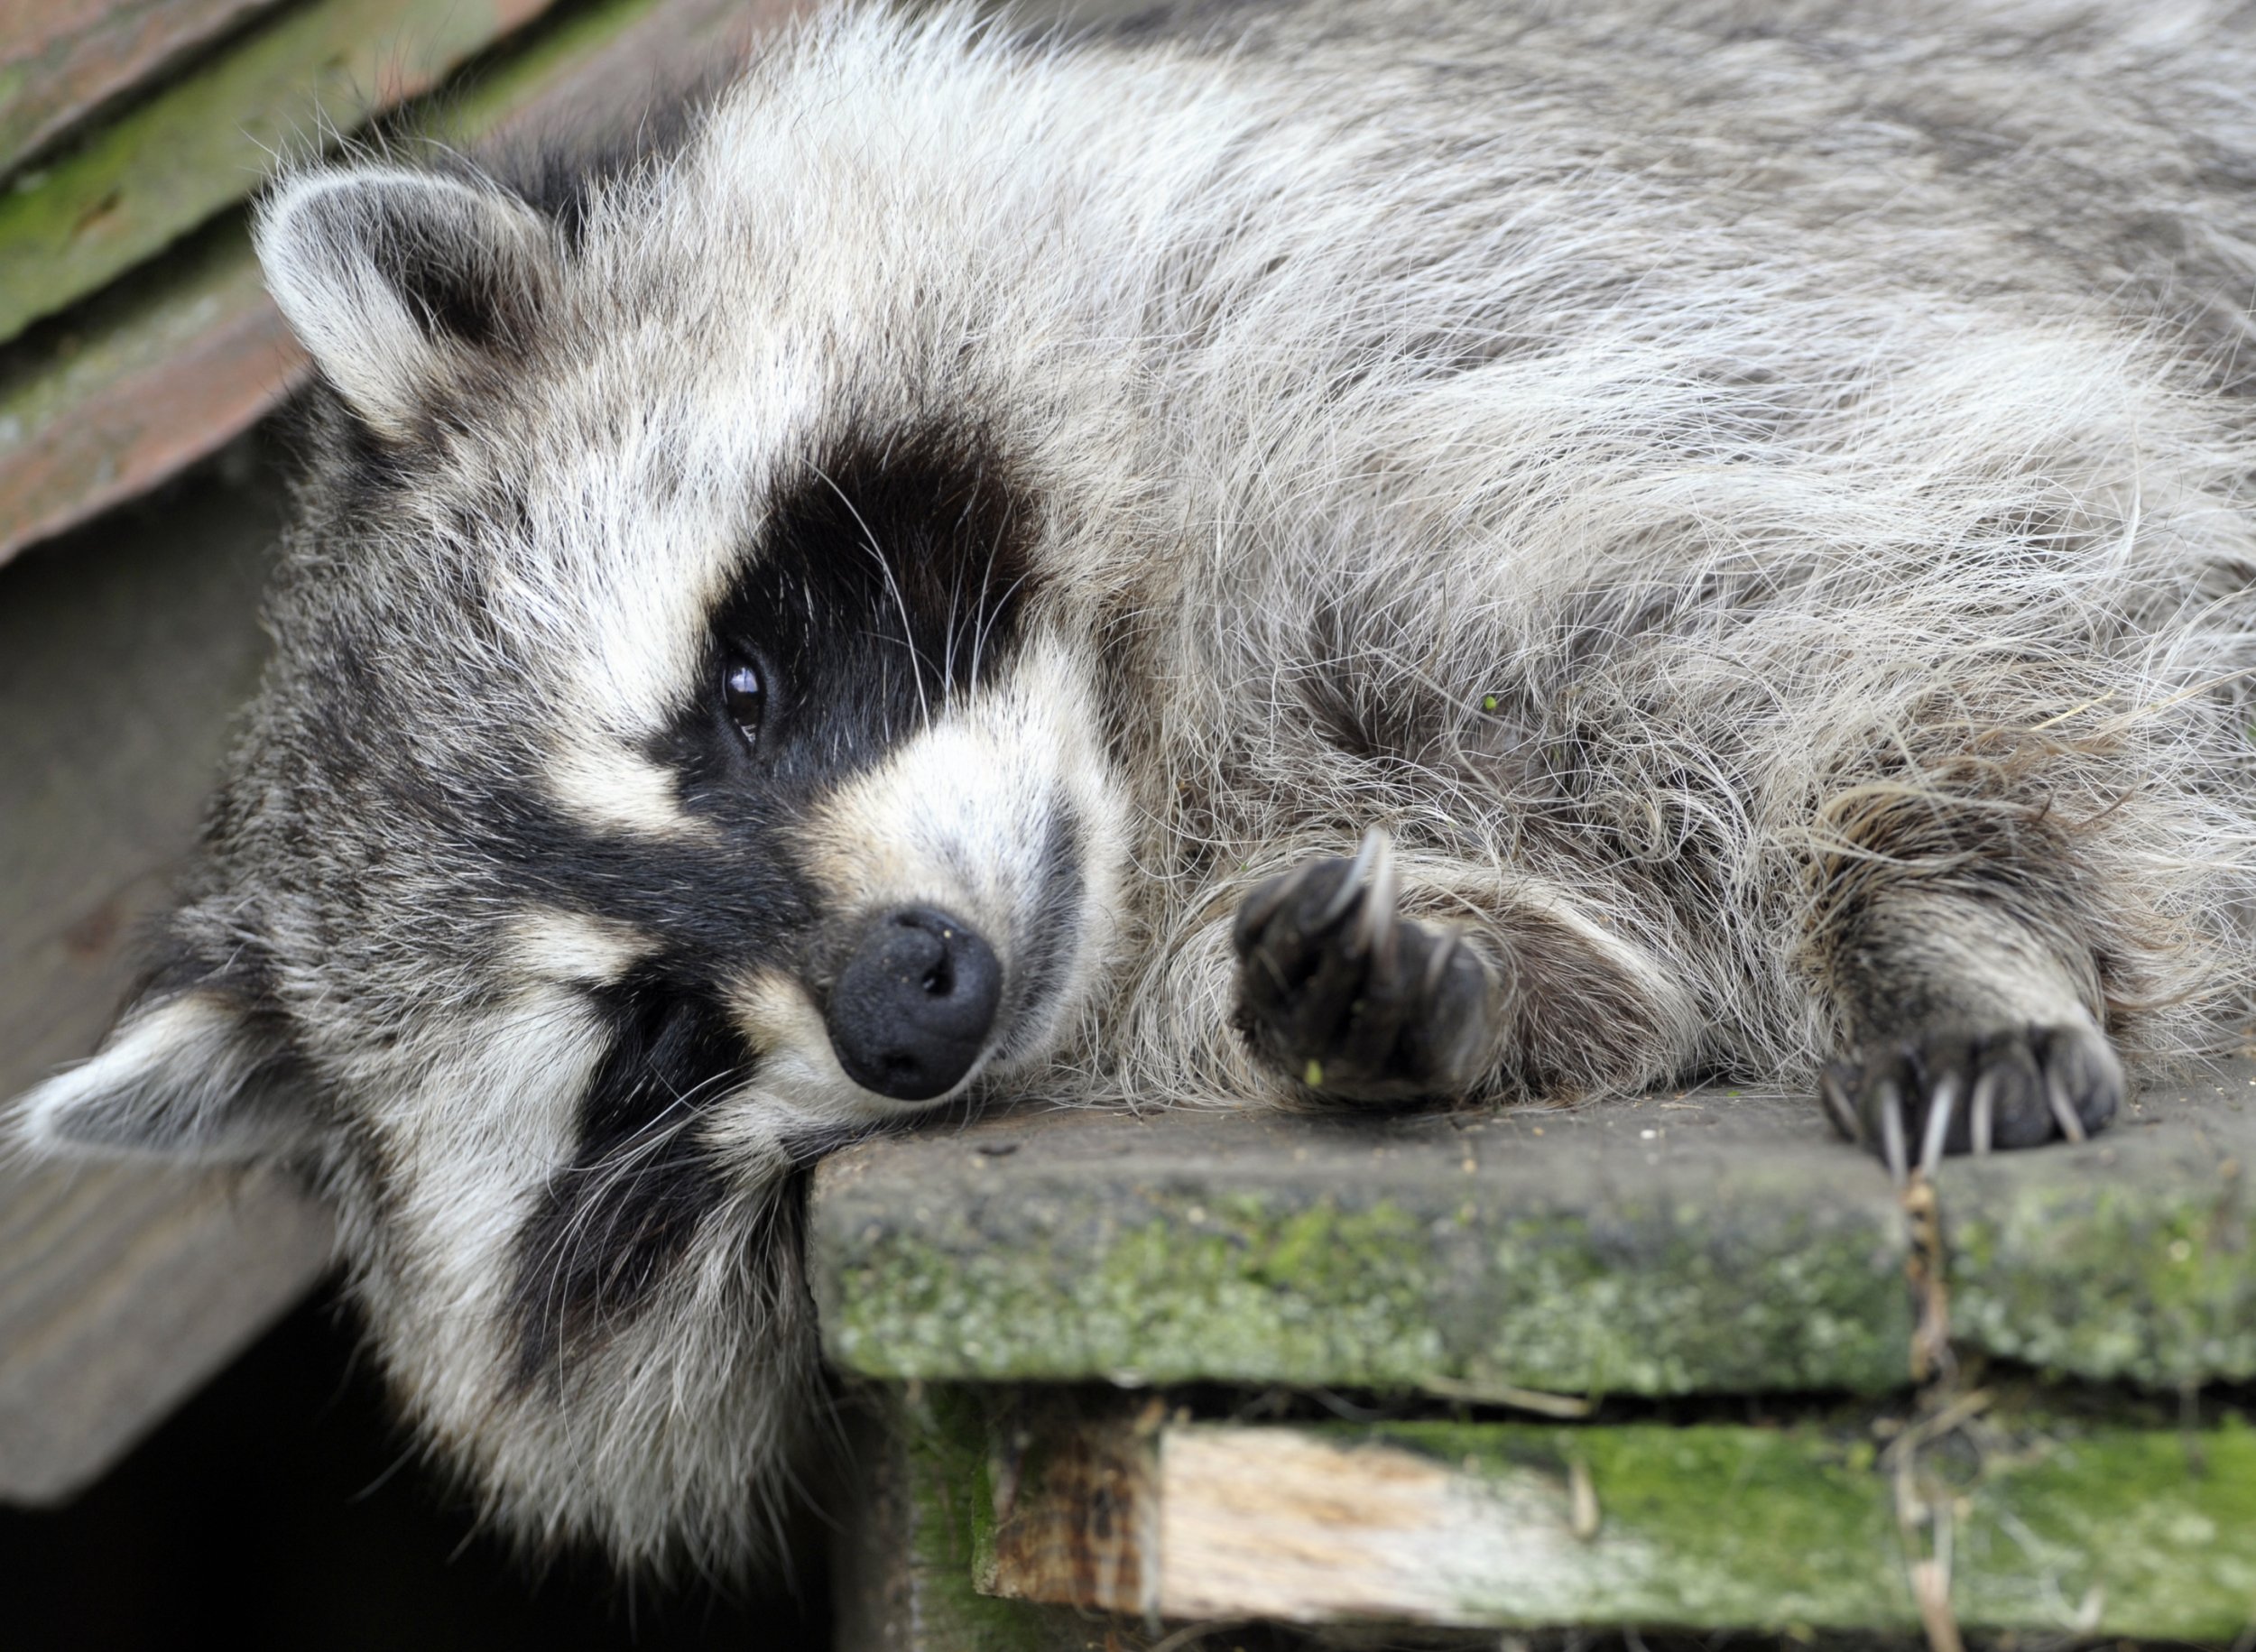 Nearly 200 "zombie" raccoons died after contracting virus...